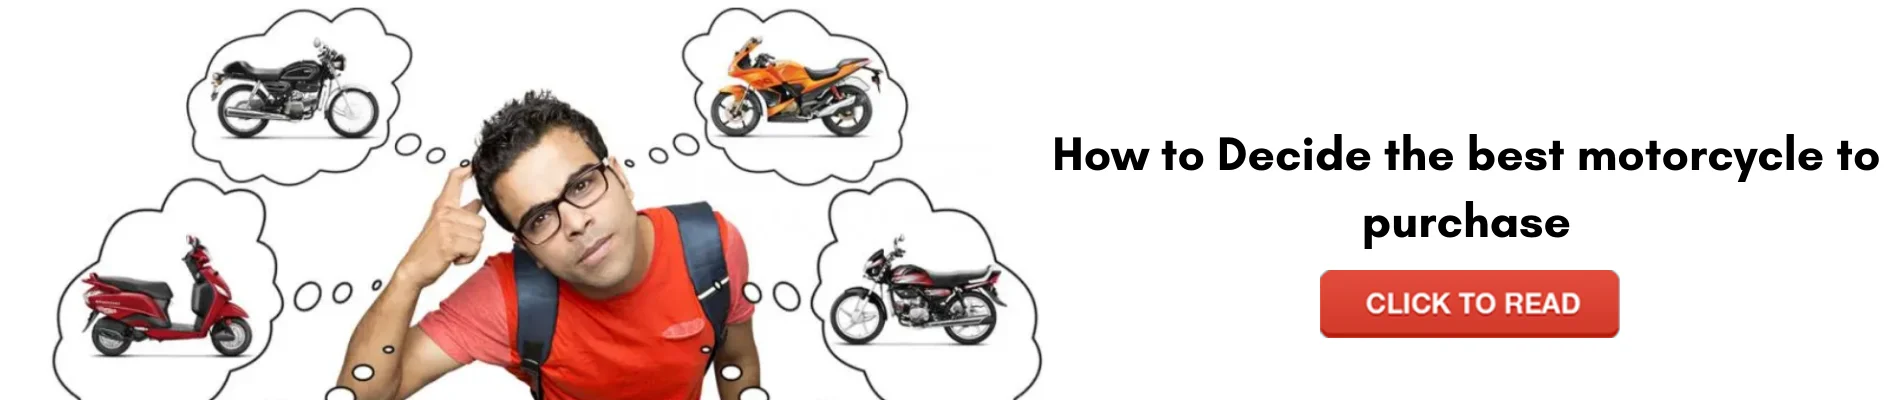 decide the best motorcycle to purchase